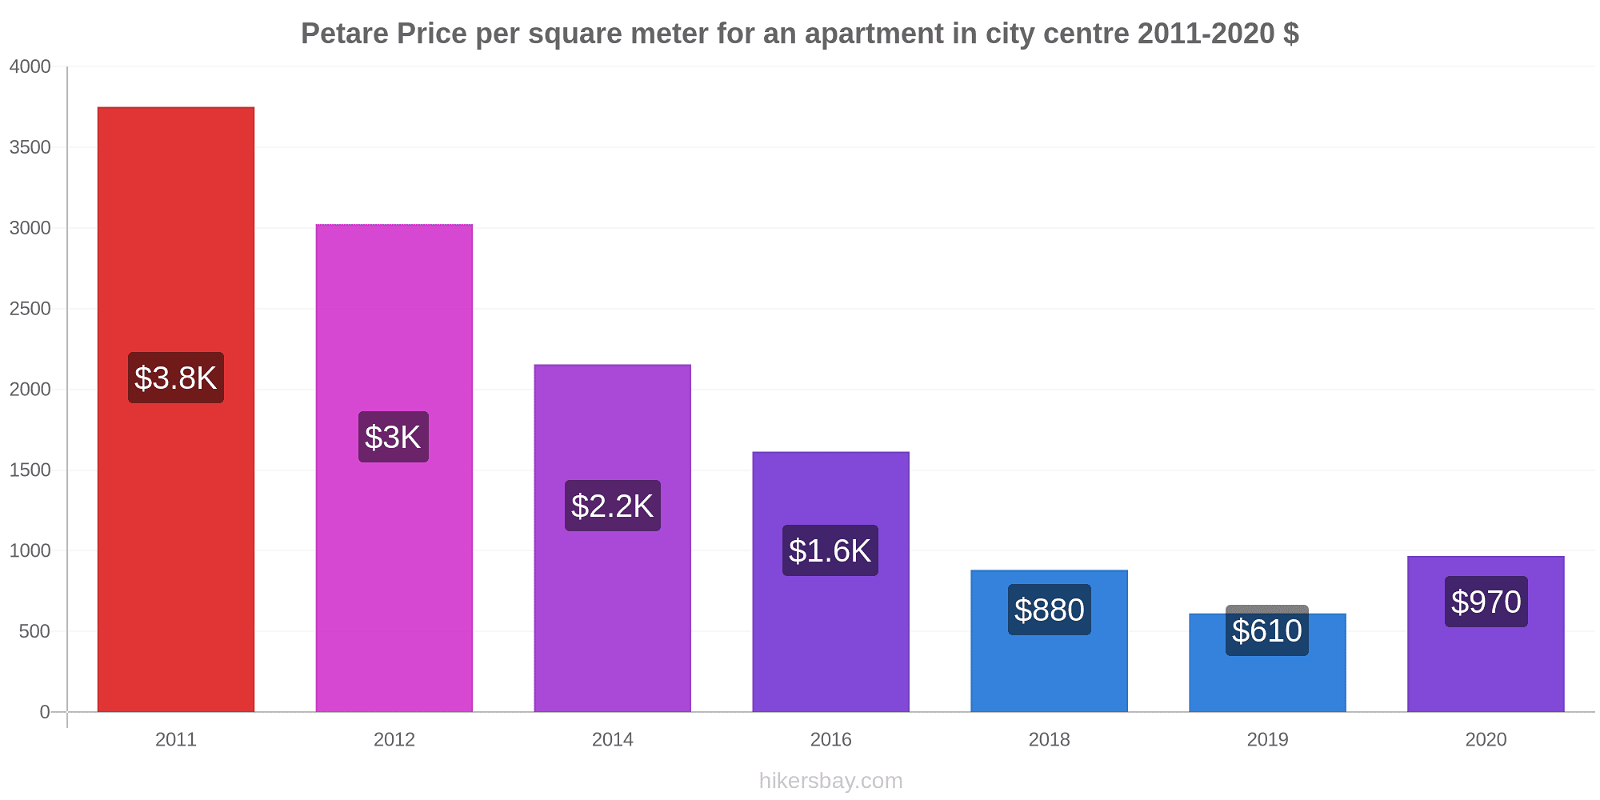 Petare price changes Price per square meter for an apartment in city centre hikersbay.com